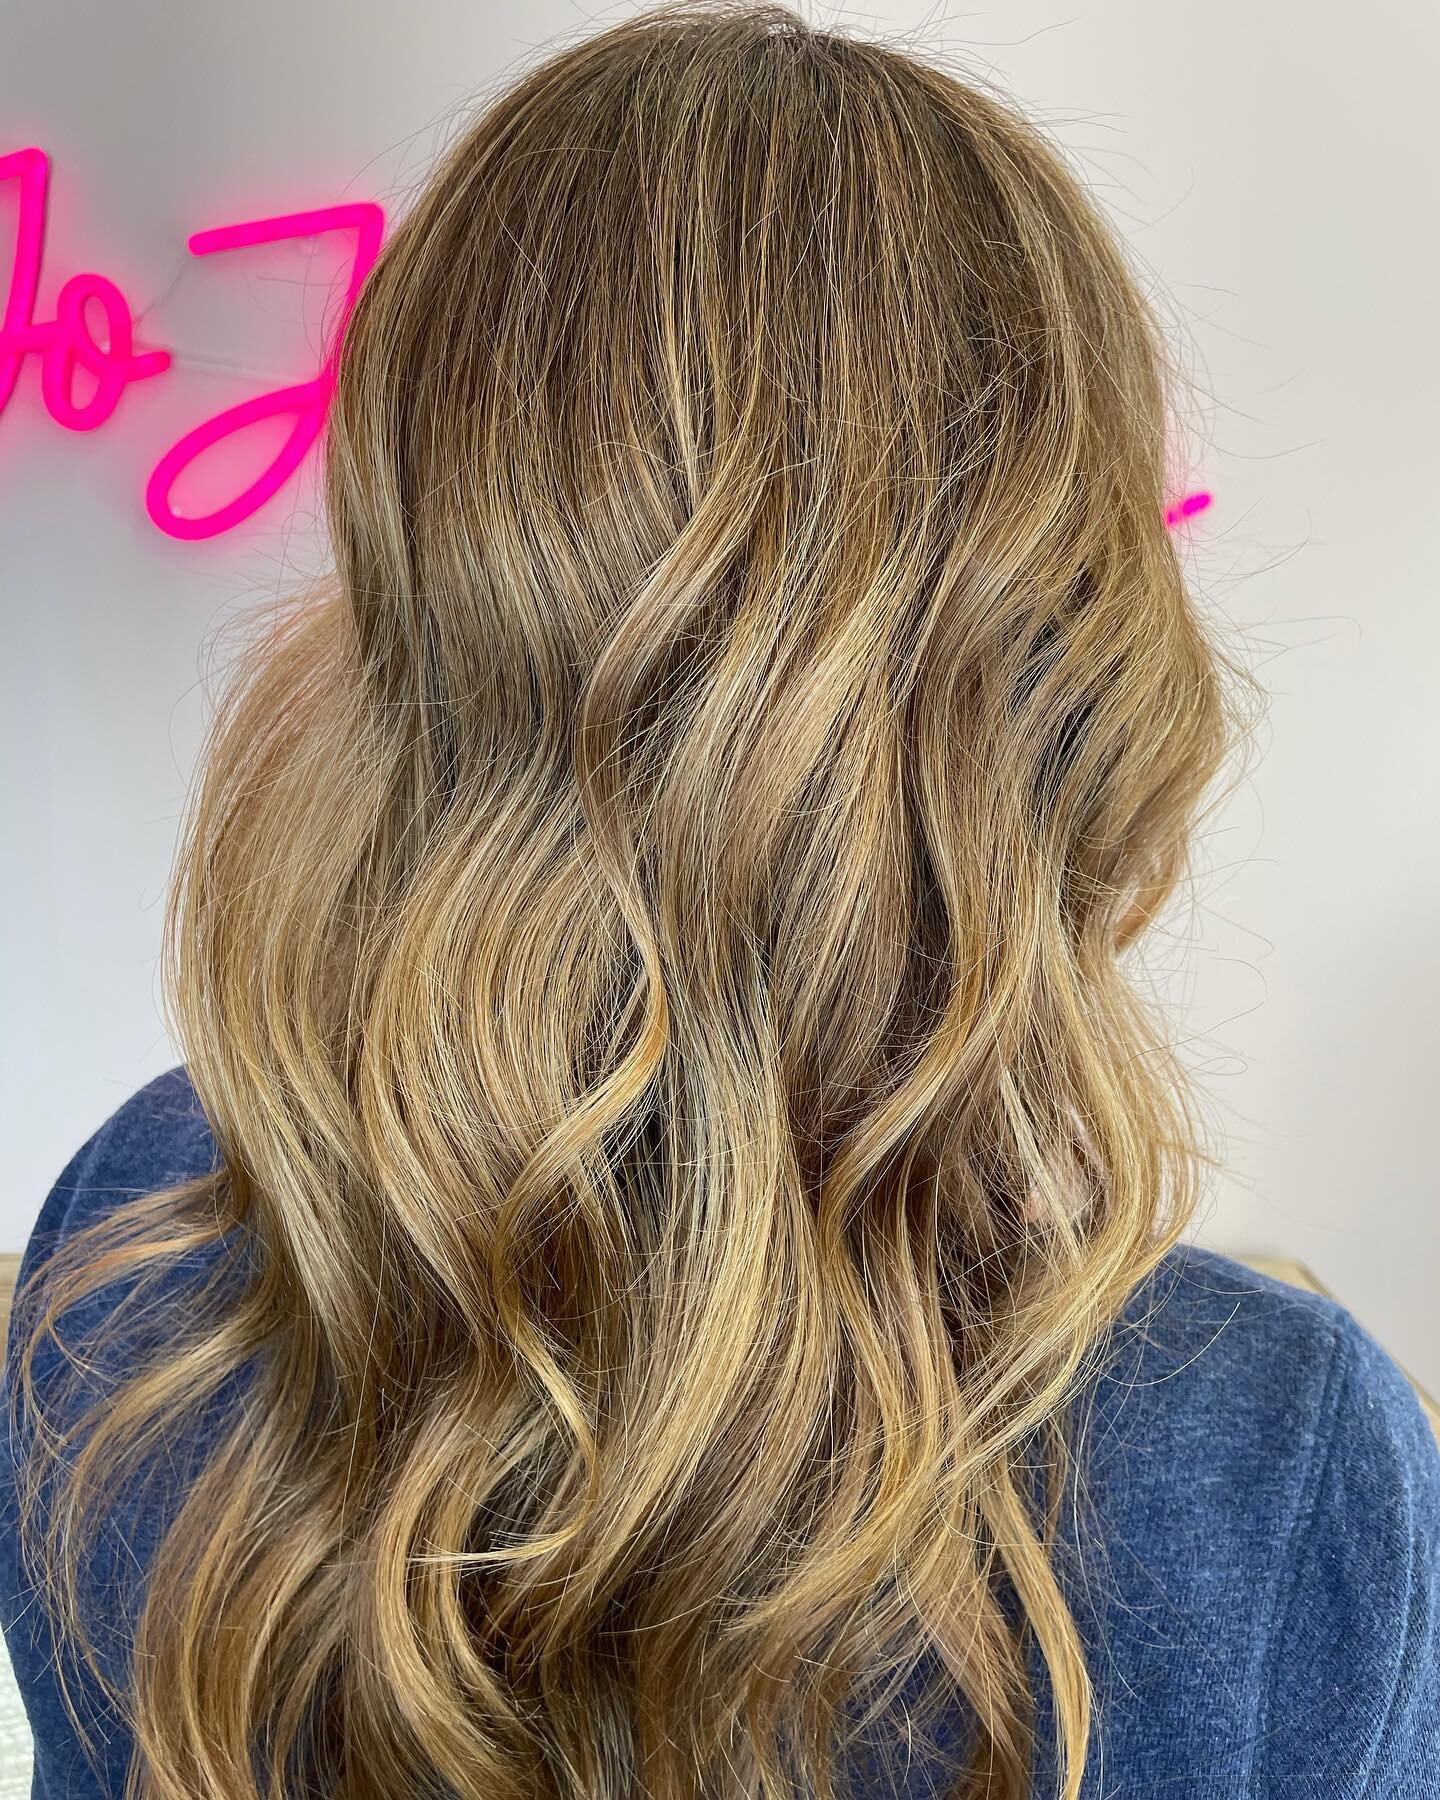 One of my favorite colors to create is dimensional blended looks! Why? 🤷🏻&zwj;♀️

They look good even when you come back for a retouch! Lisa comes in every 6 weeks for a root retouch and we only do highlights every 4-5 months. We sometimes color me